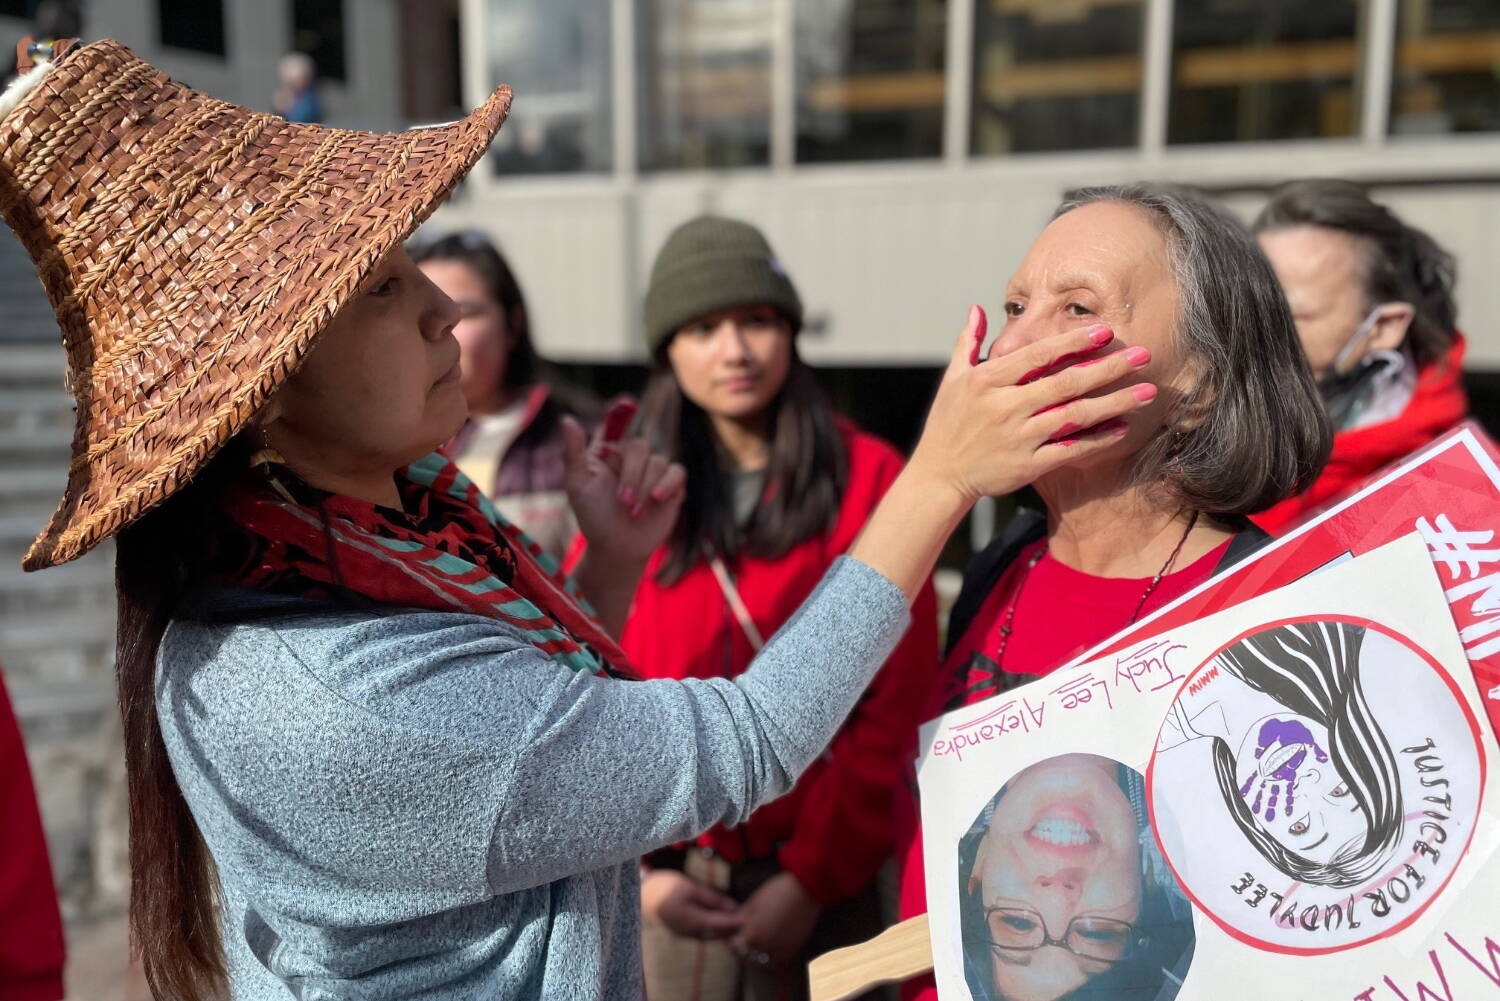 Candace Frank gets a red handprint pressed onto her face at the Missing and Murdered Indigenous People Rally in Juneau on May 5, 2022. (Lisa Phu / Alaska Beacon)